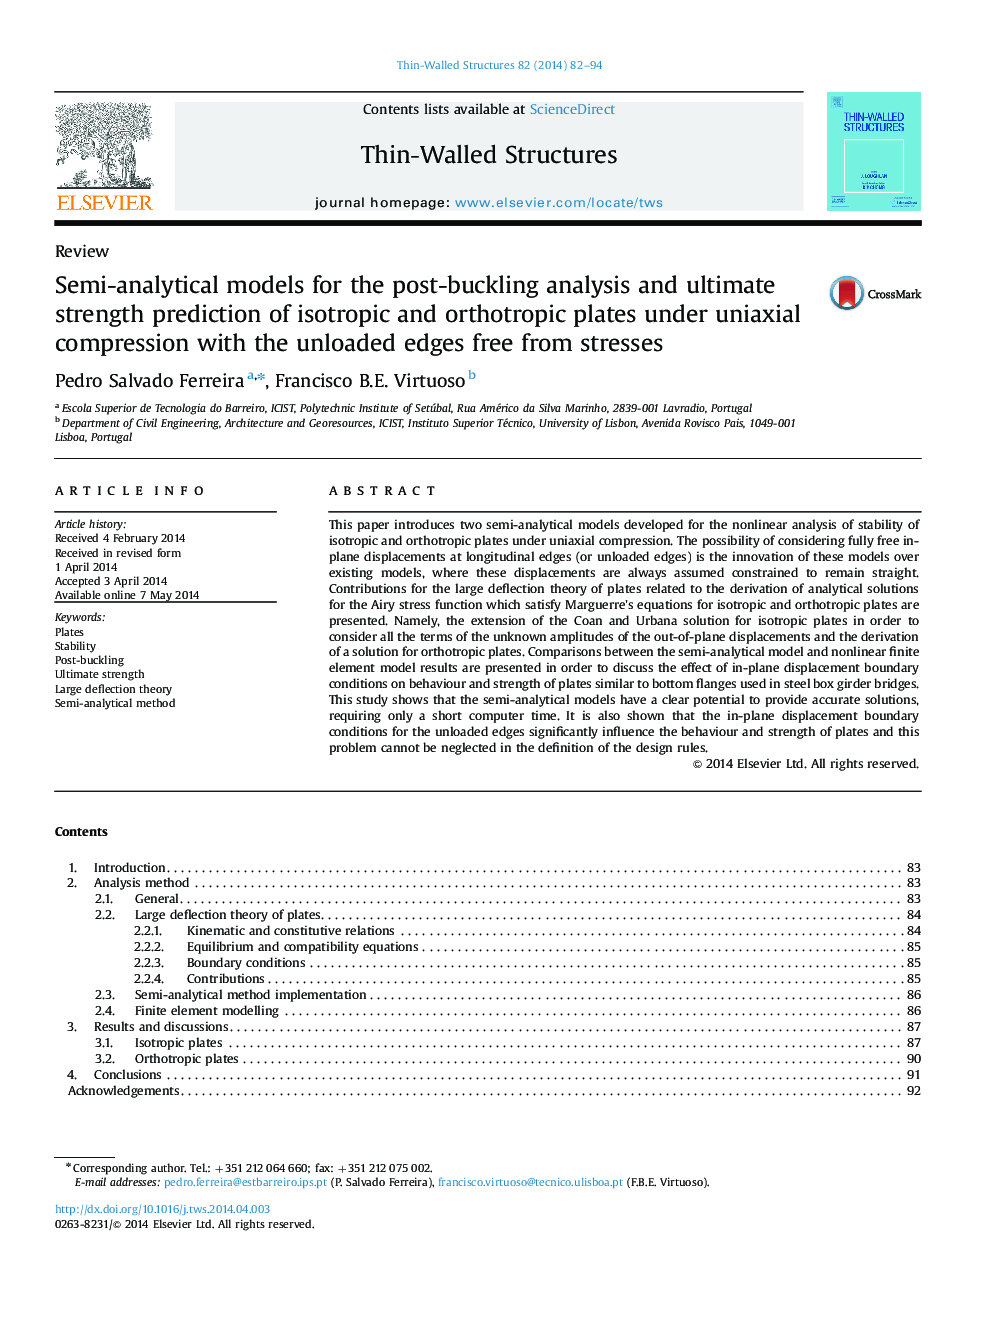 Semi-analytical models for the post-buckling analysis and ultimate strength prediction of isotropic and orthotropic plates under uniaxial compression with the unloaded edges free from stresses